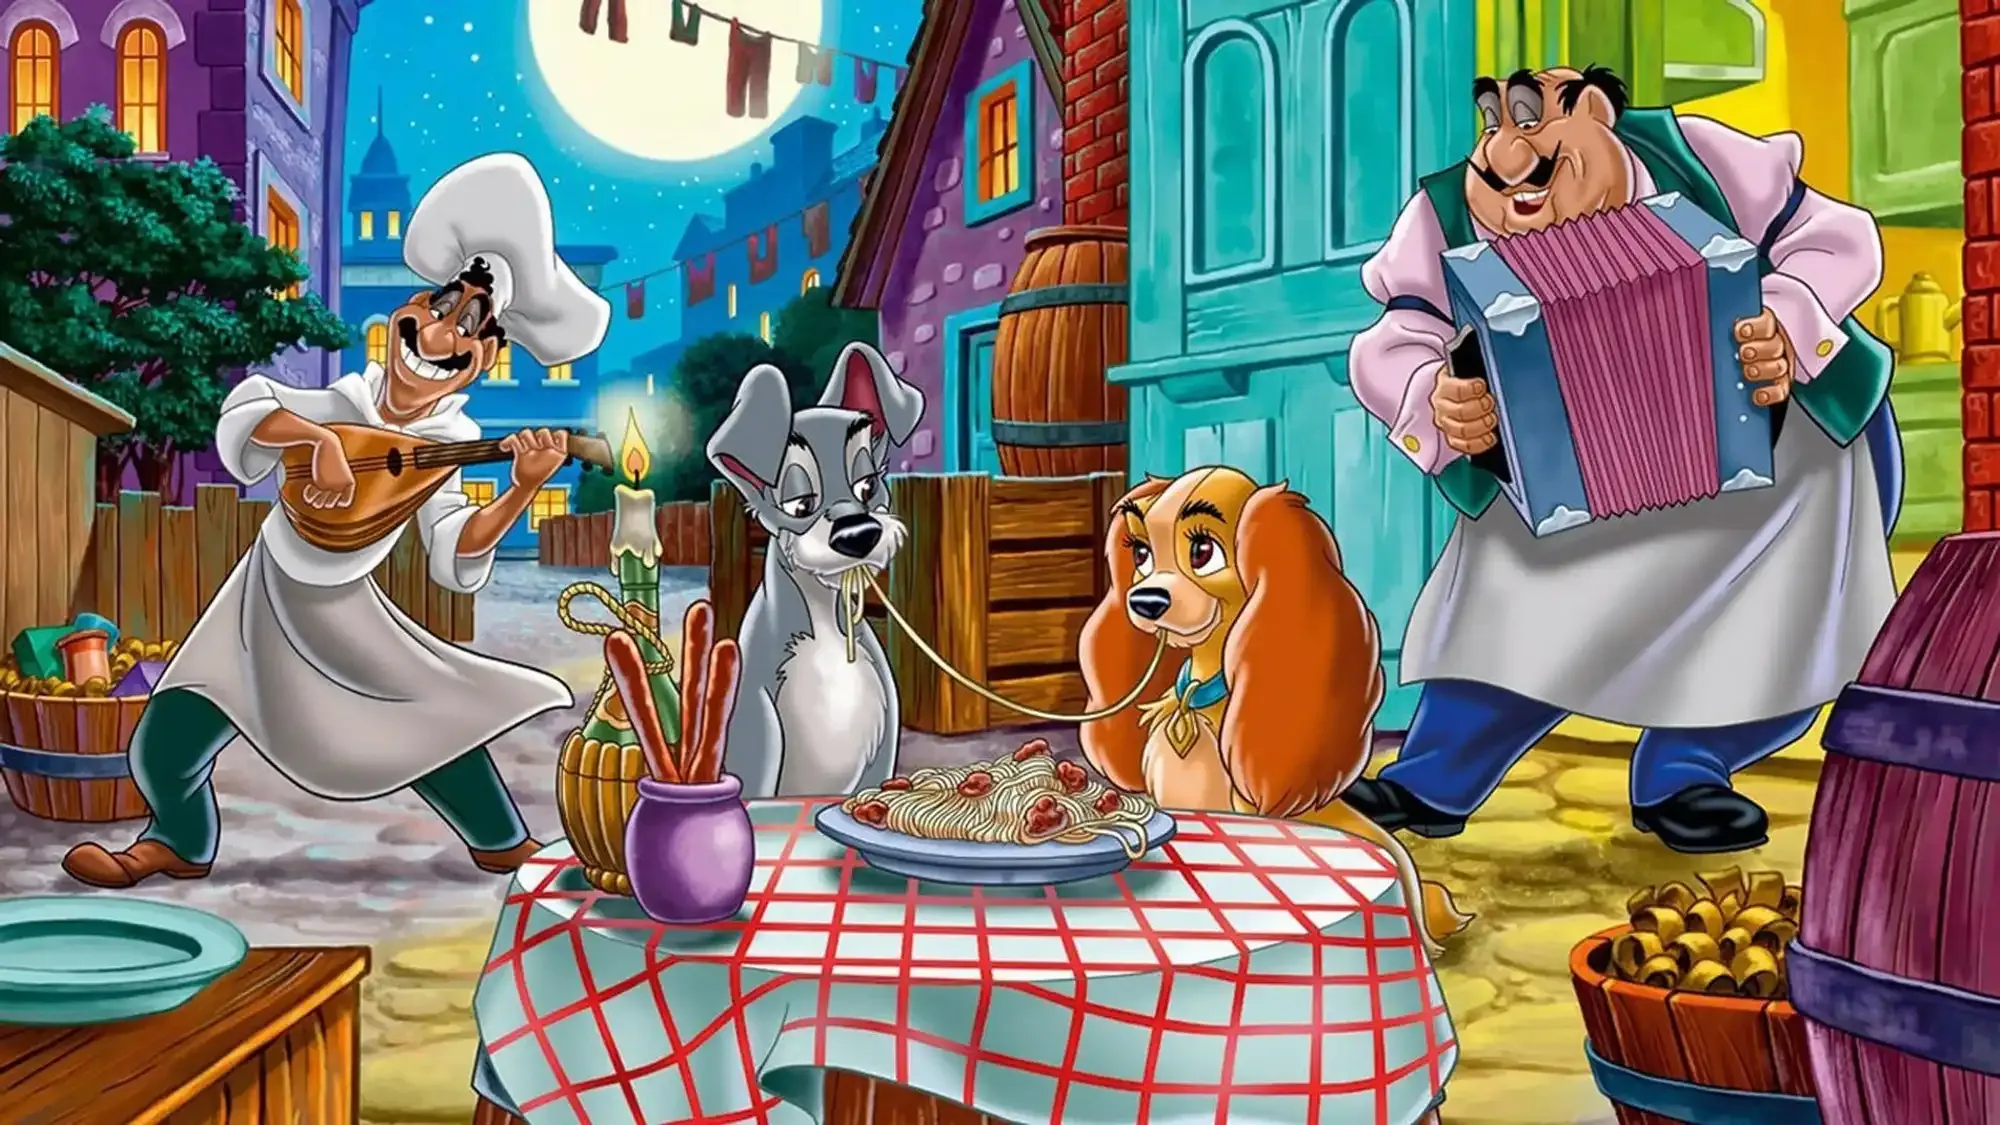 Lady and the Tramp movie review